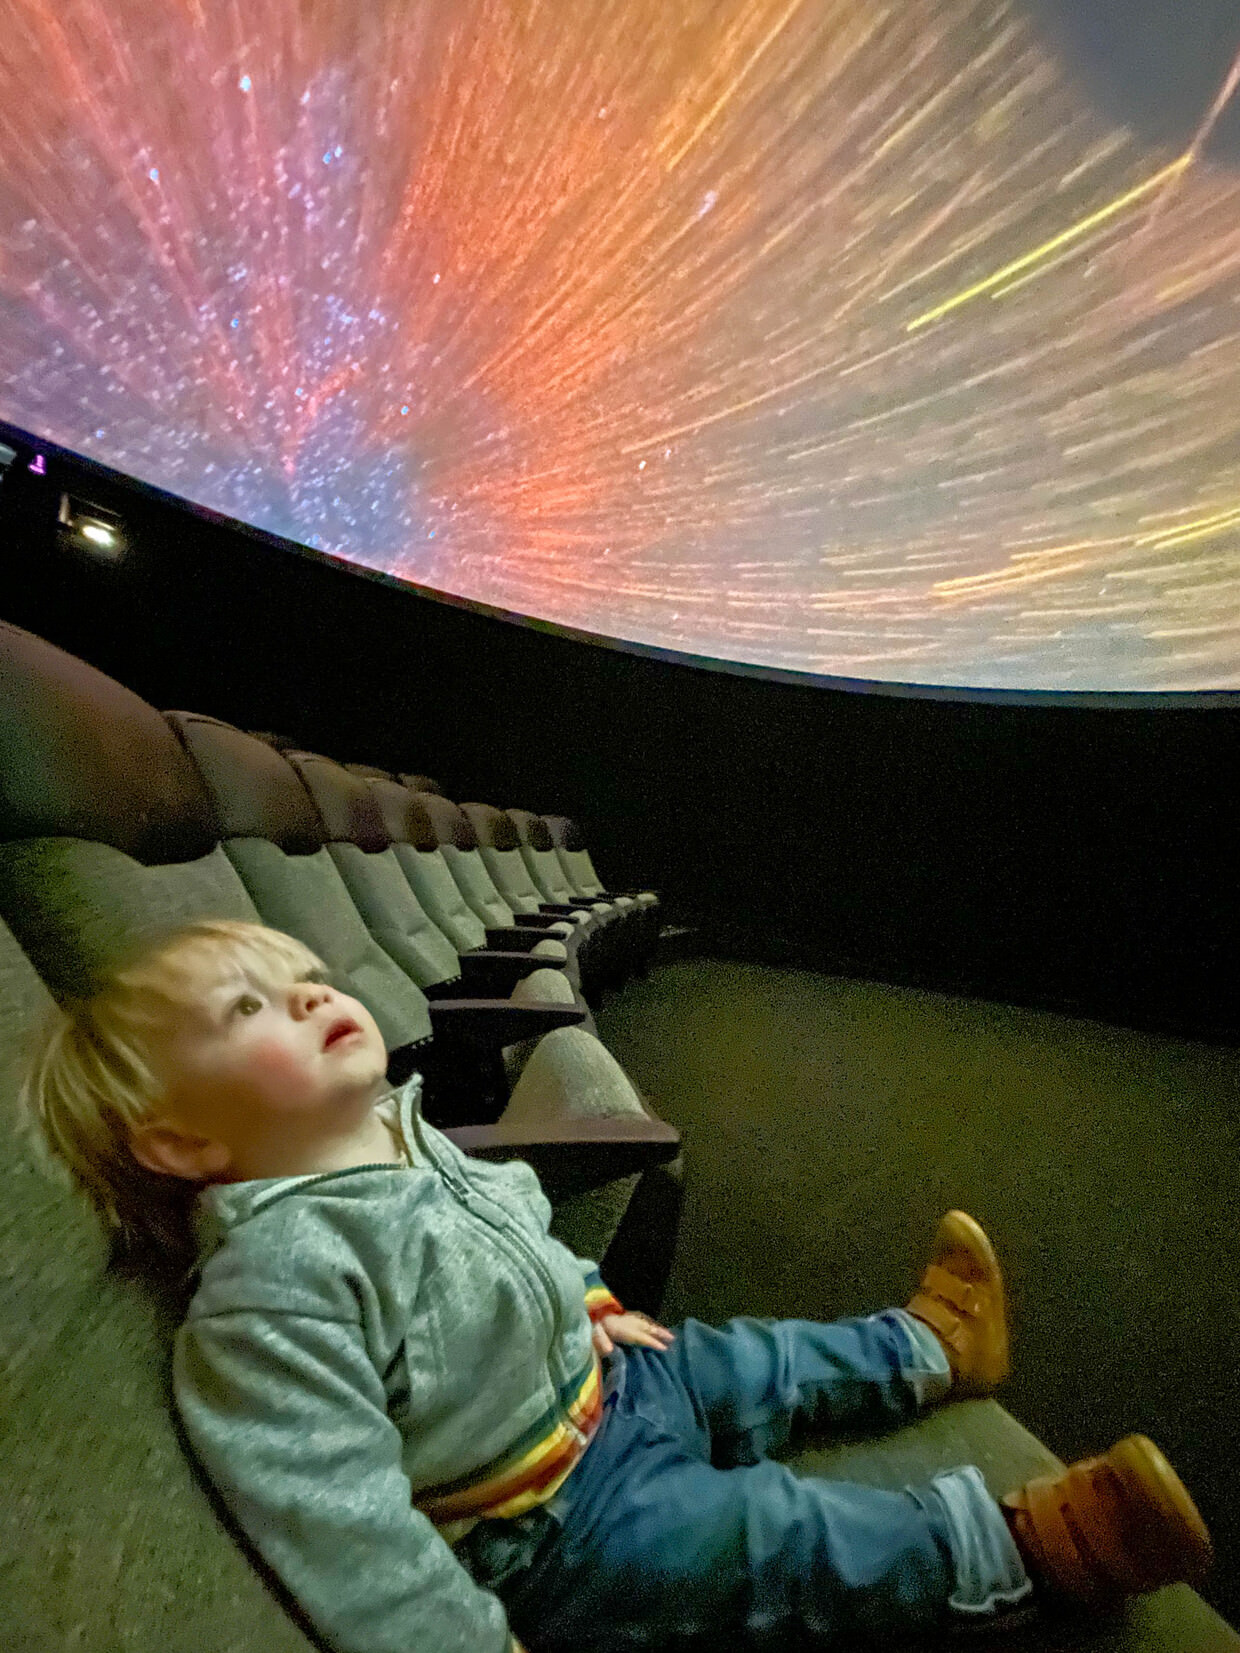 Forrest in awe at the Aurora planetarium show